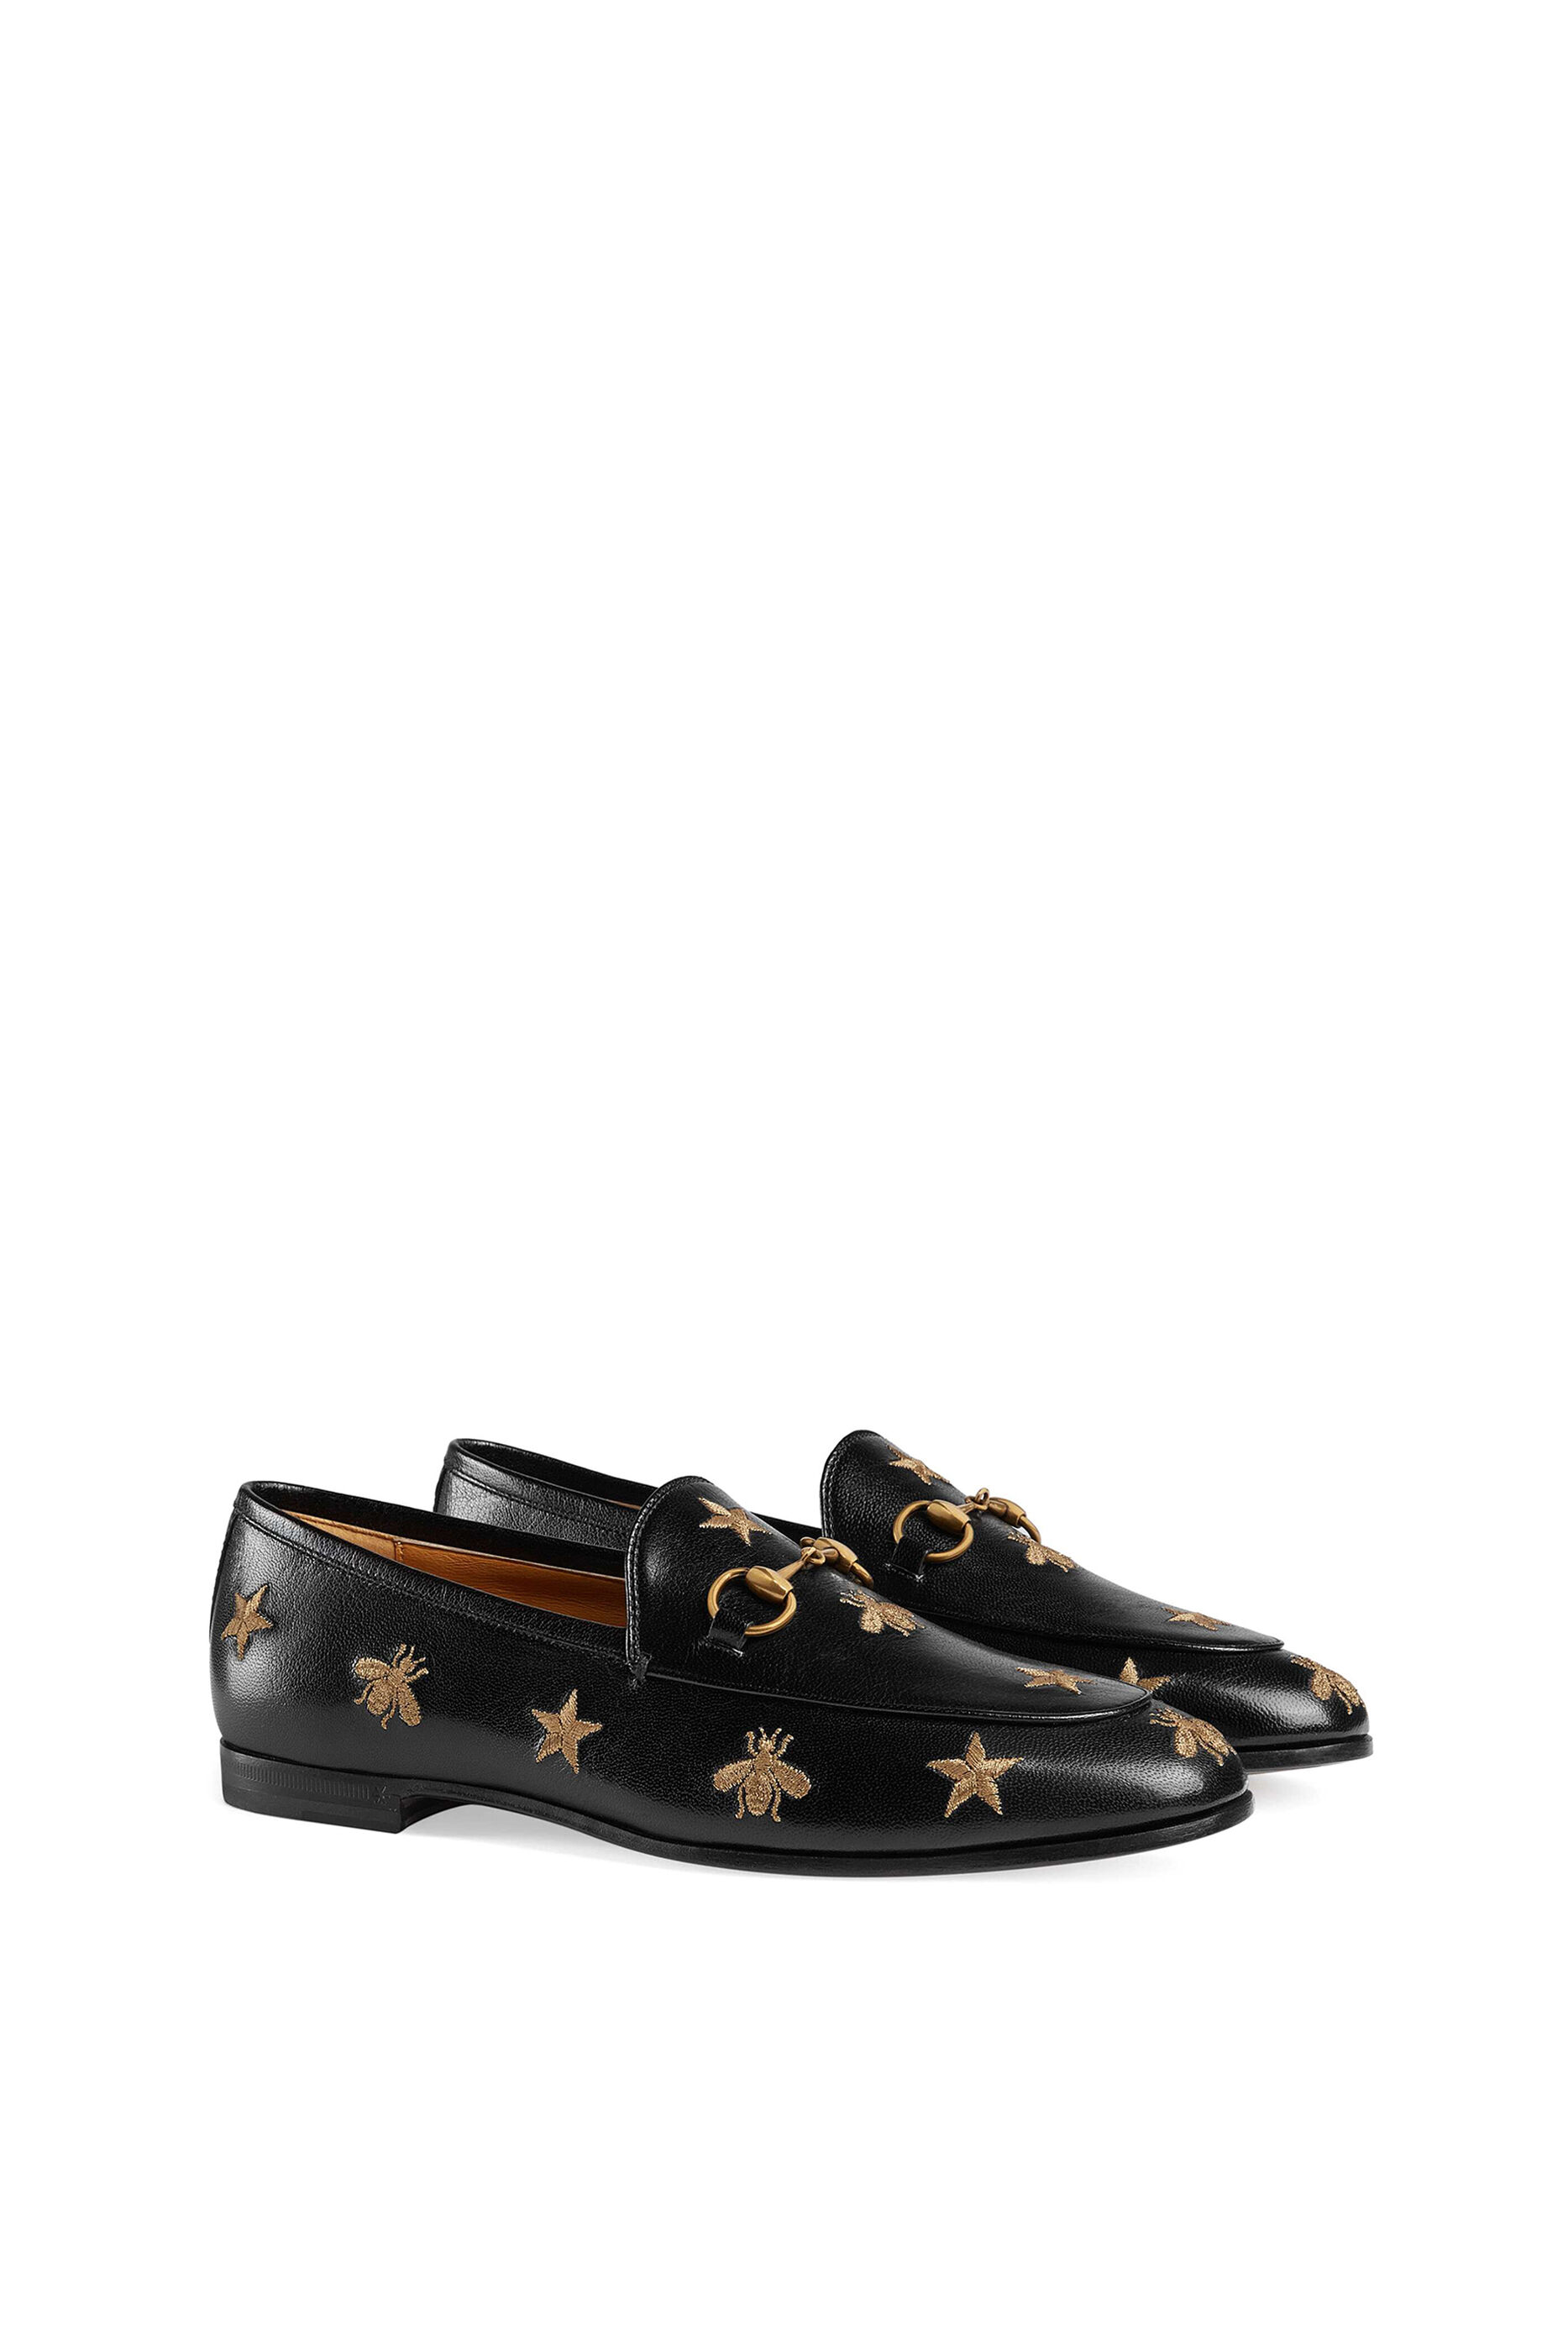 gucci jordaan embroidered leather loafer